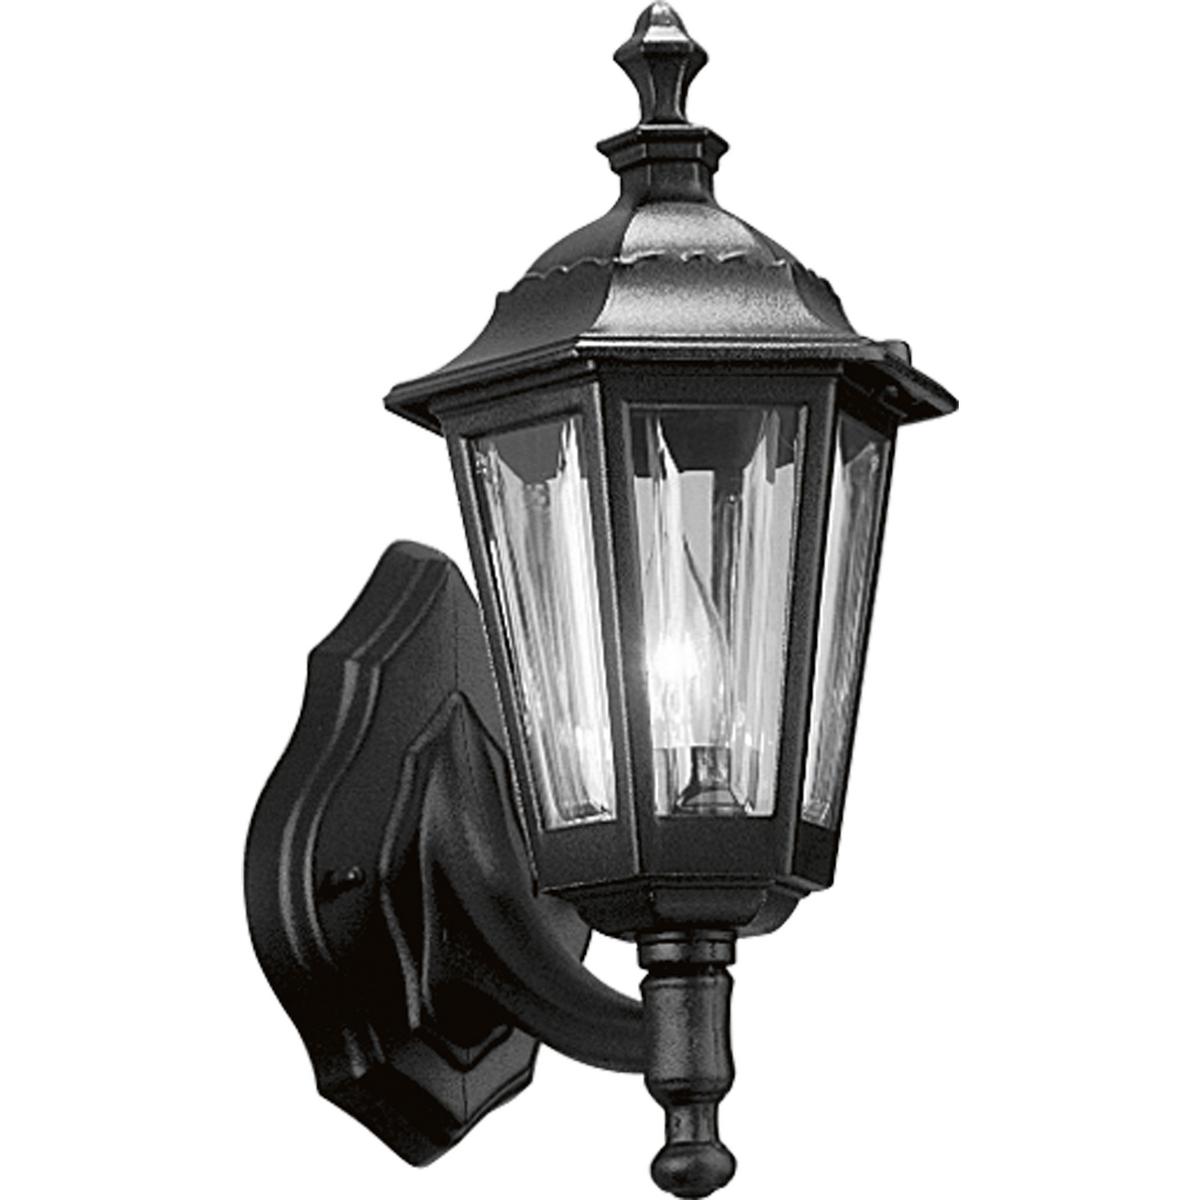 Hubbell P5826-31 Make sure friends and relatives know right away where your house is when you decorate with this striking wall lantern in a black finish. With shatter-resistant acrylic panels, this outdoor lighting excels in both form and function. Cast aluminum wall lant